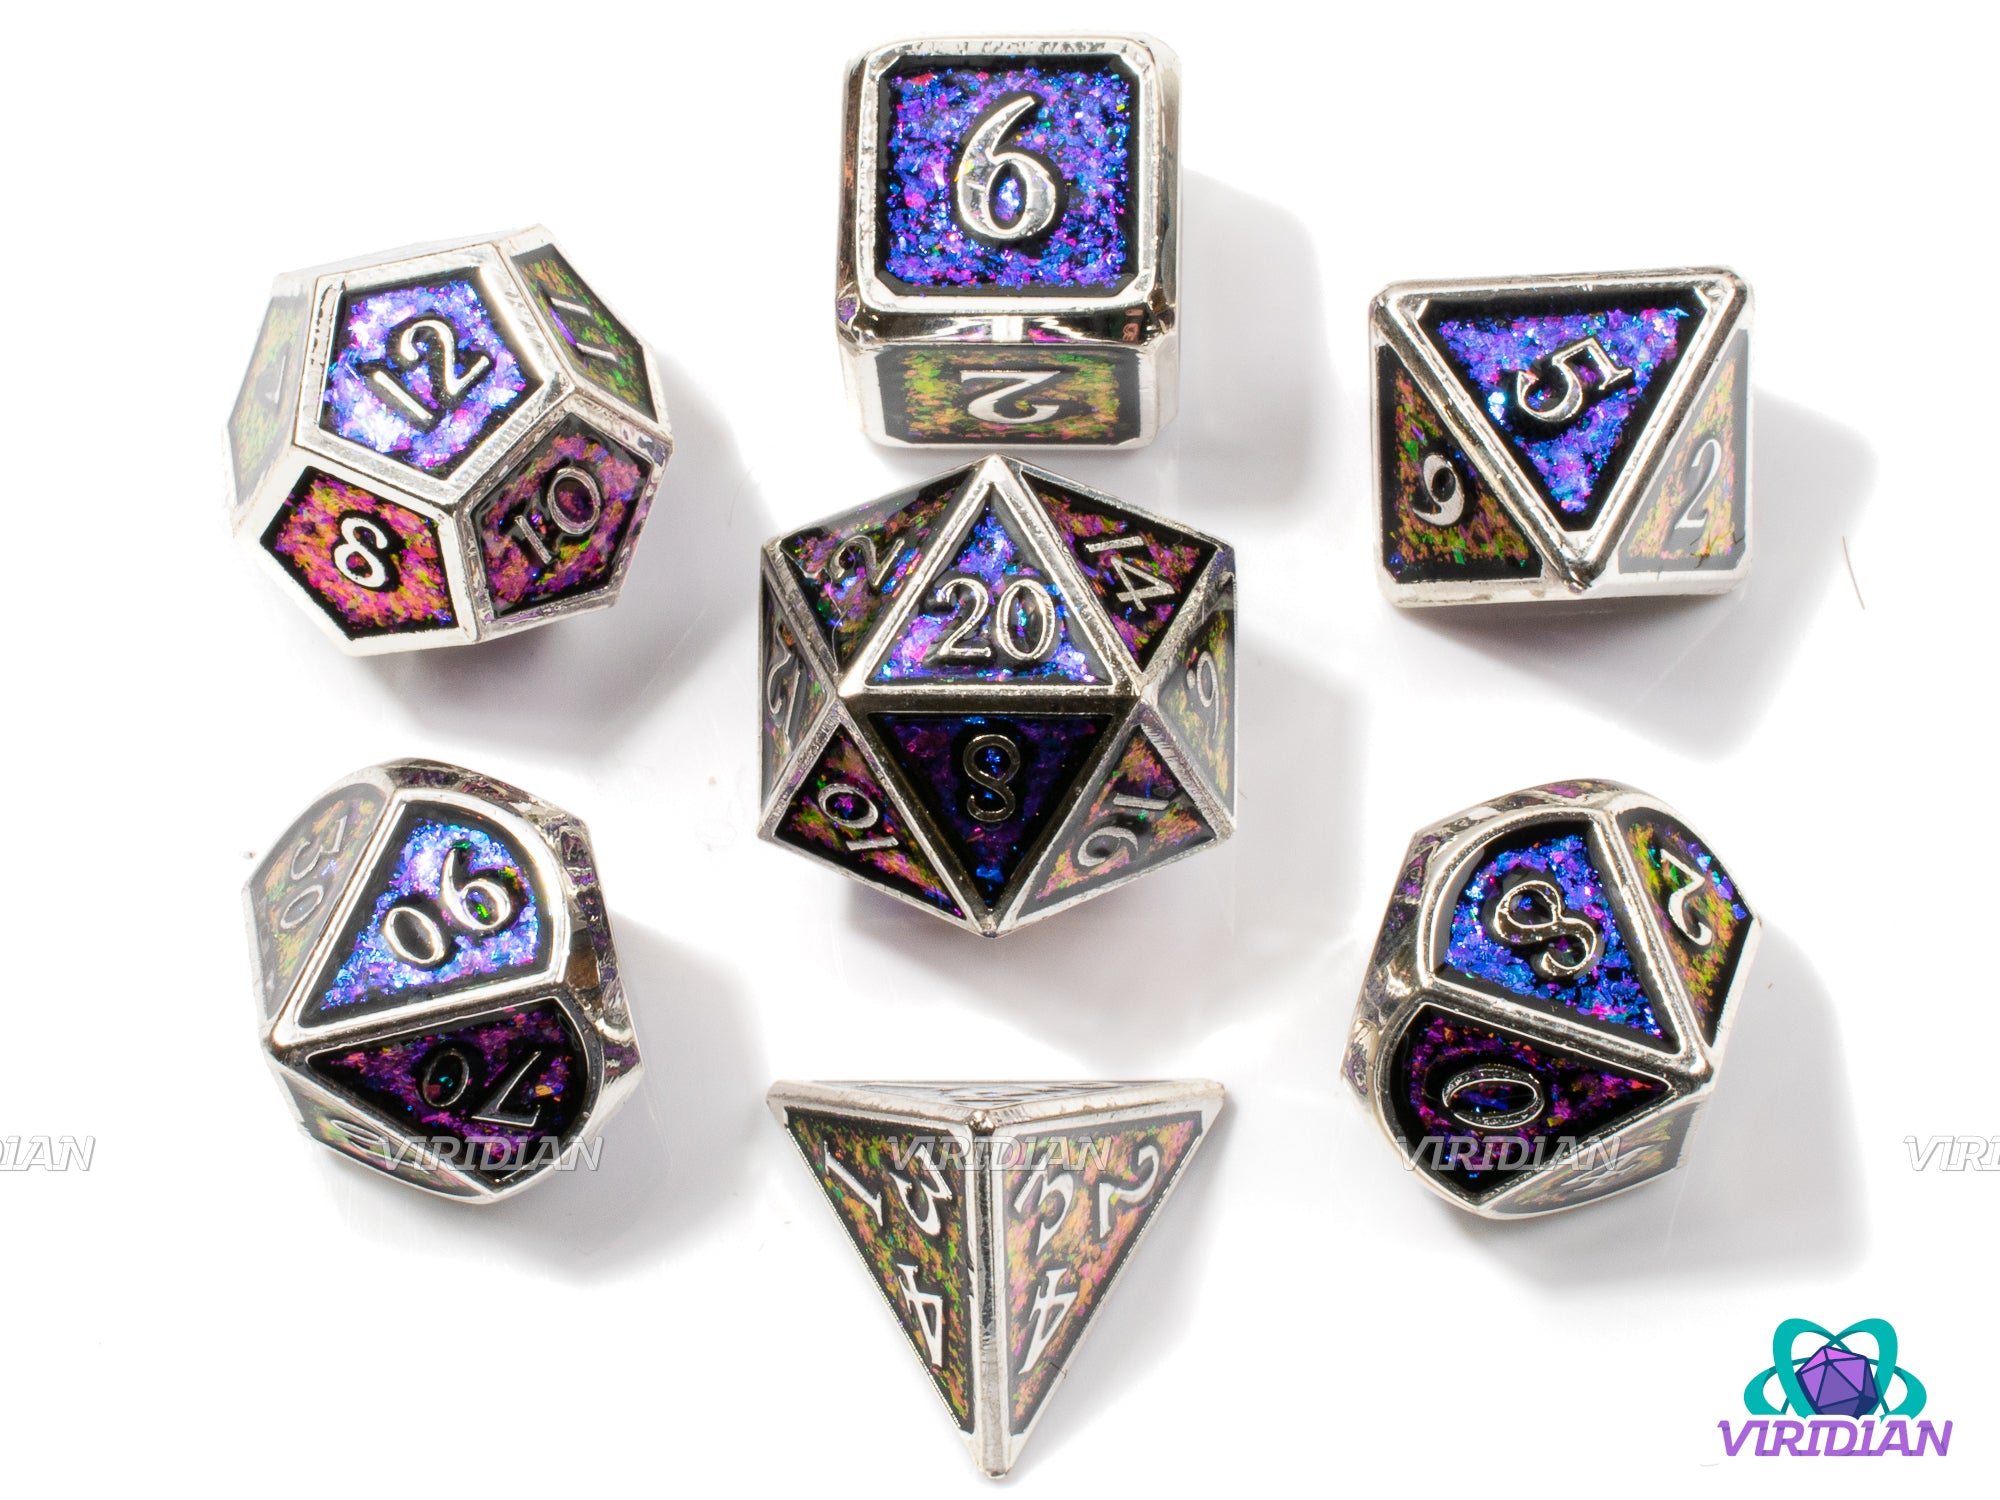 Colors of the Wind (Color-Shift) | Blue -> Purple -> Magenta & Silver Iridescent Mica | Polyhedral Metal Dice Set (7)